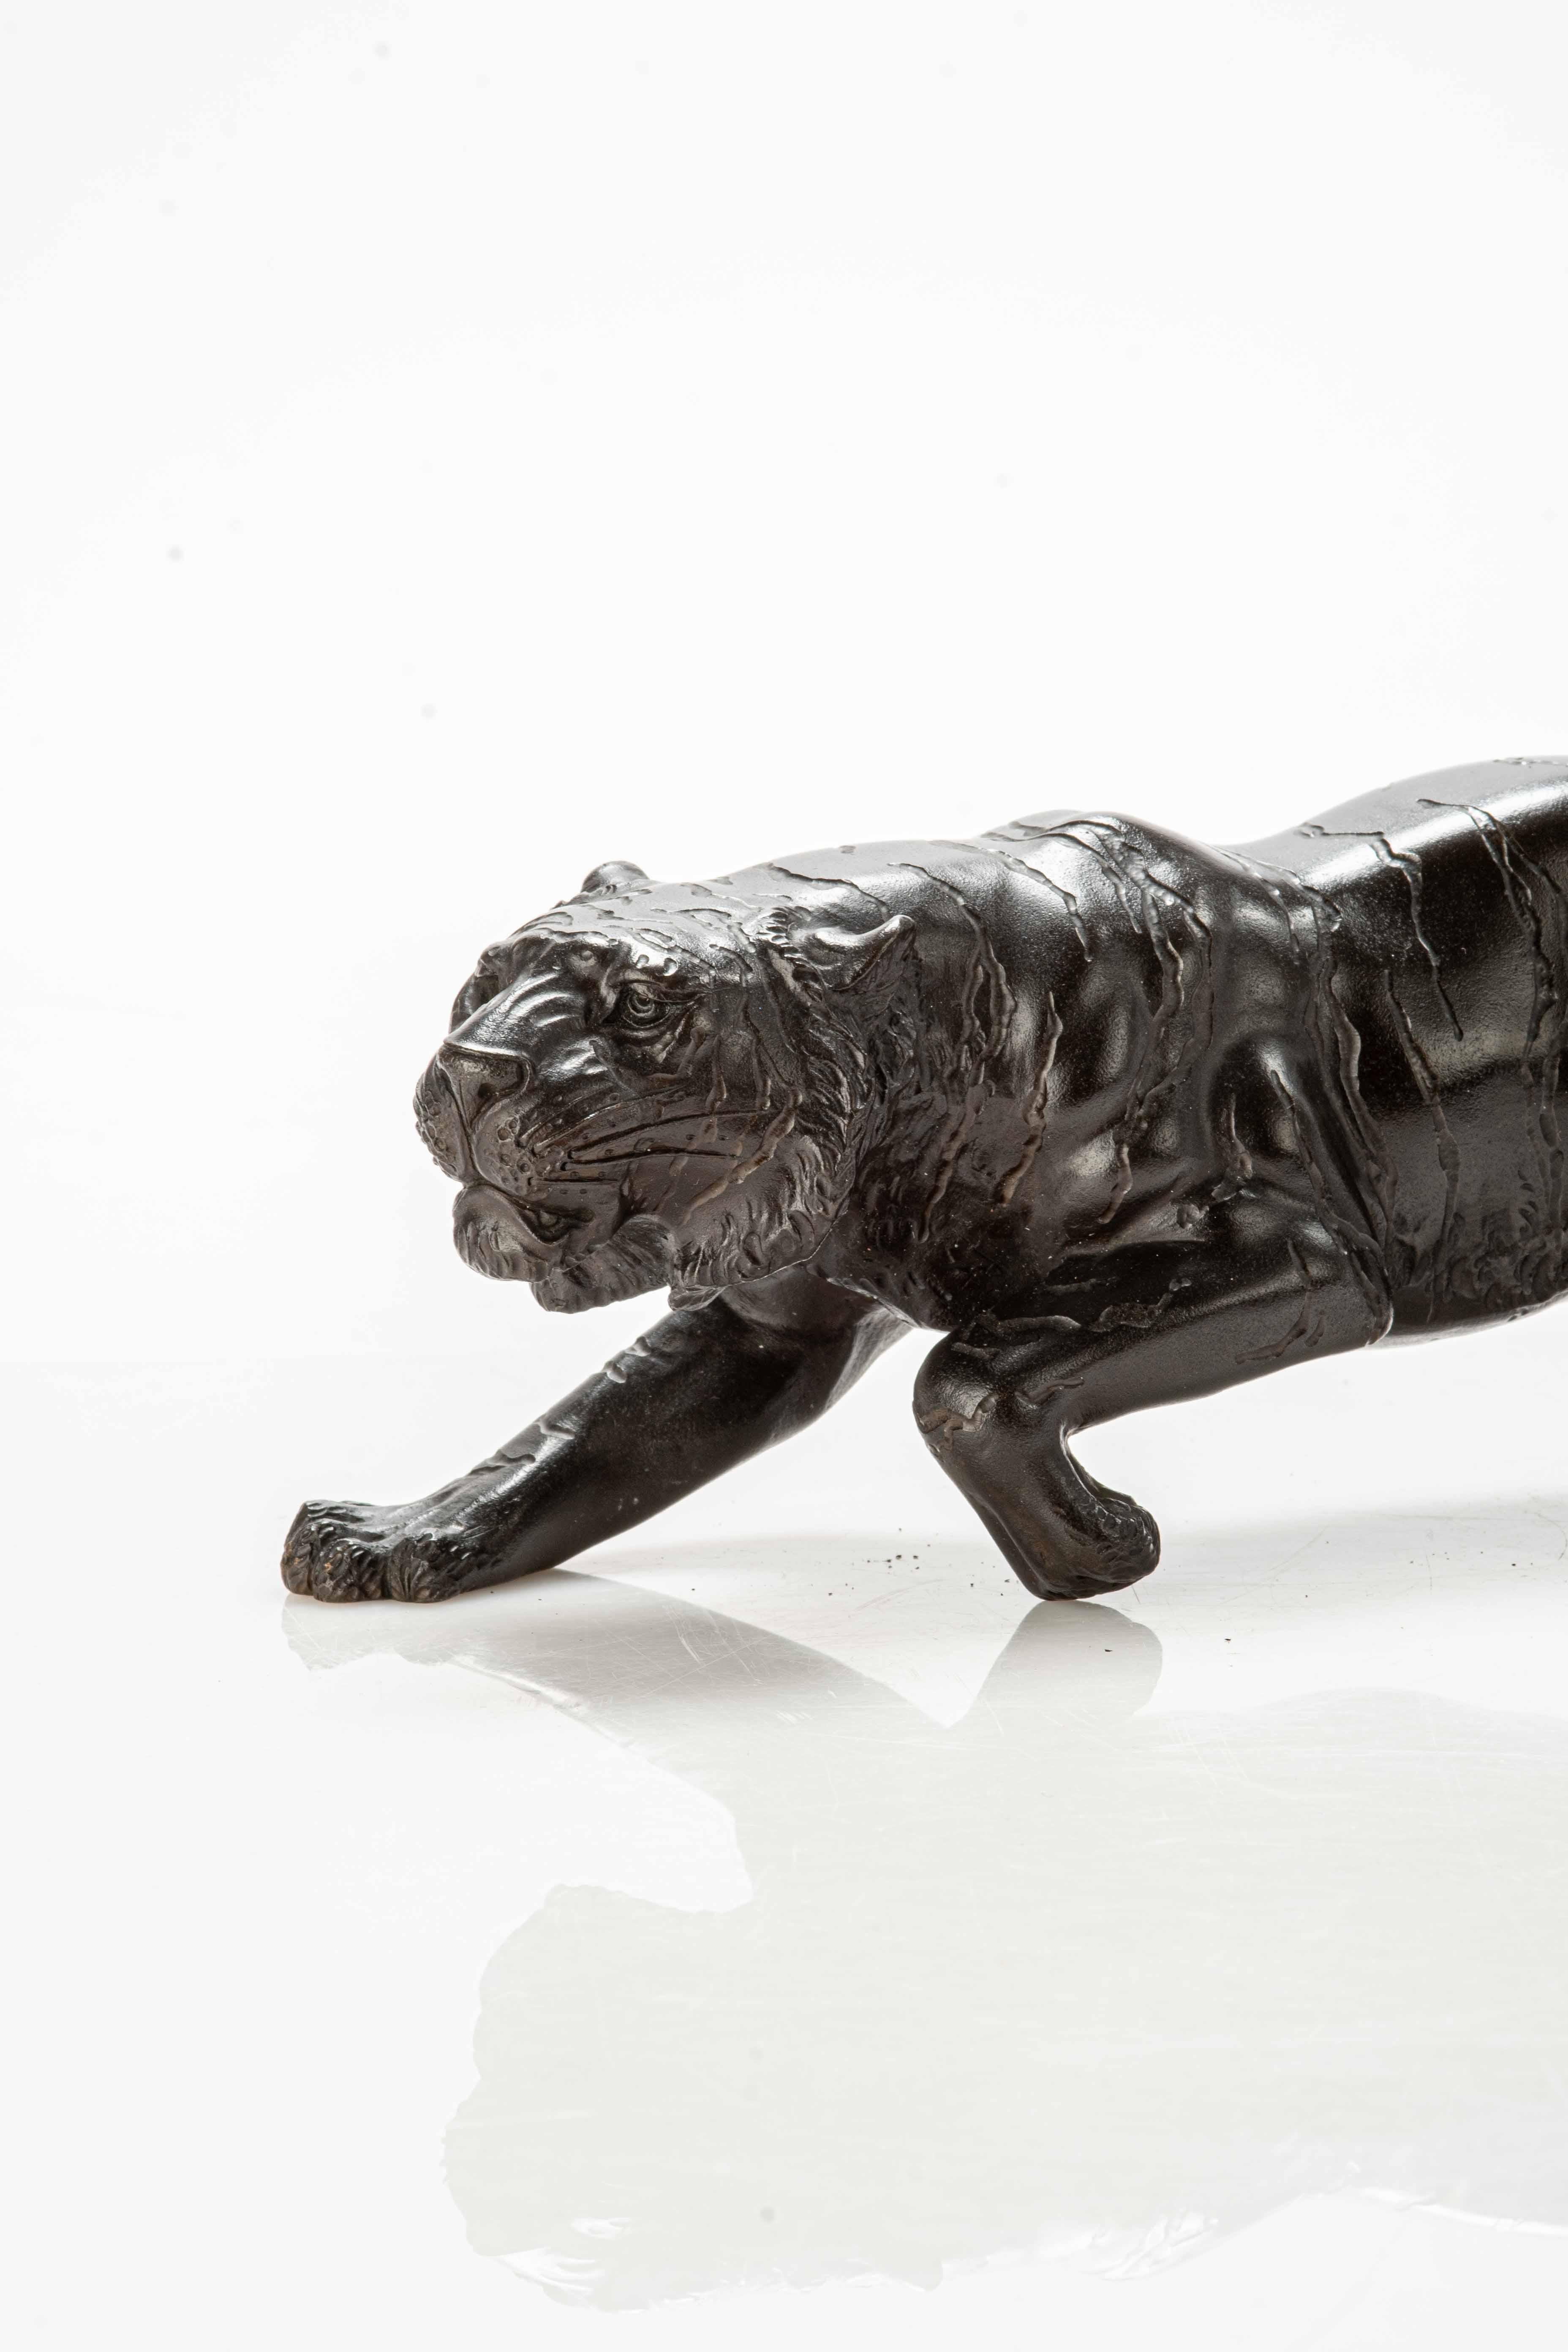 Bronze okimono depicting the study of a powerful tiger in a furtive position.

The animal is represented with its legs bent, its tail curled upwards and its body in a lowered position just before launching the attack.

The streaks of the fur,